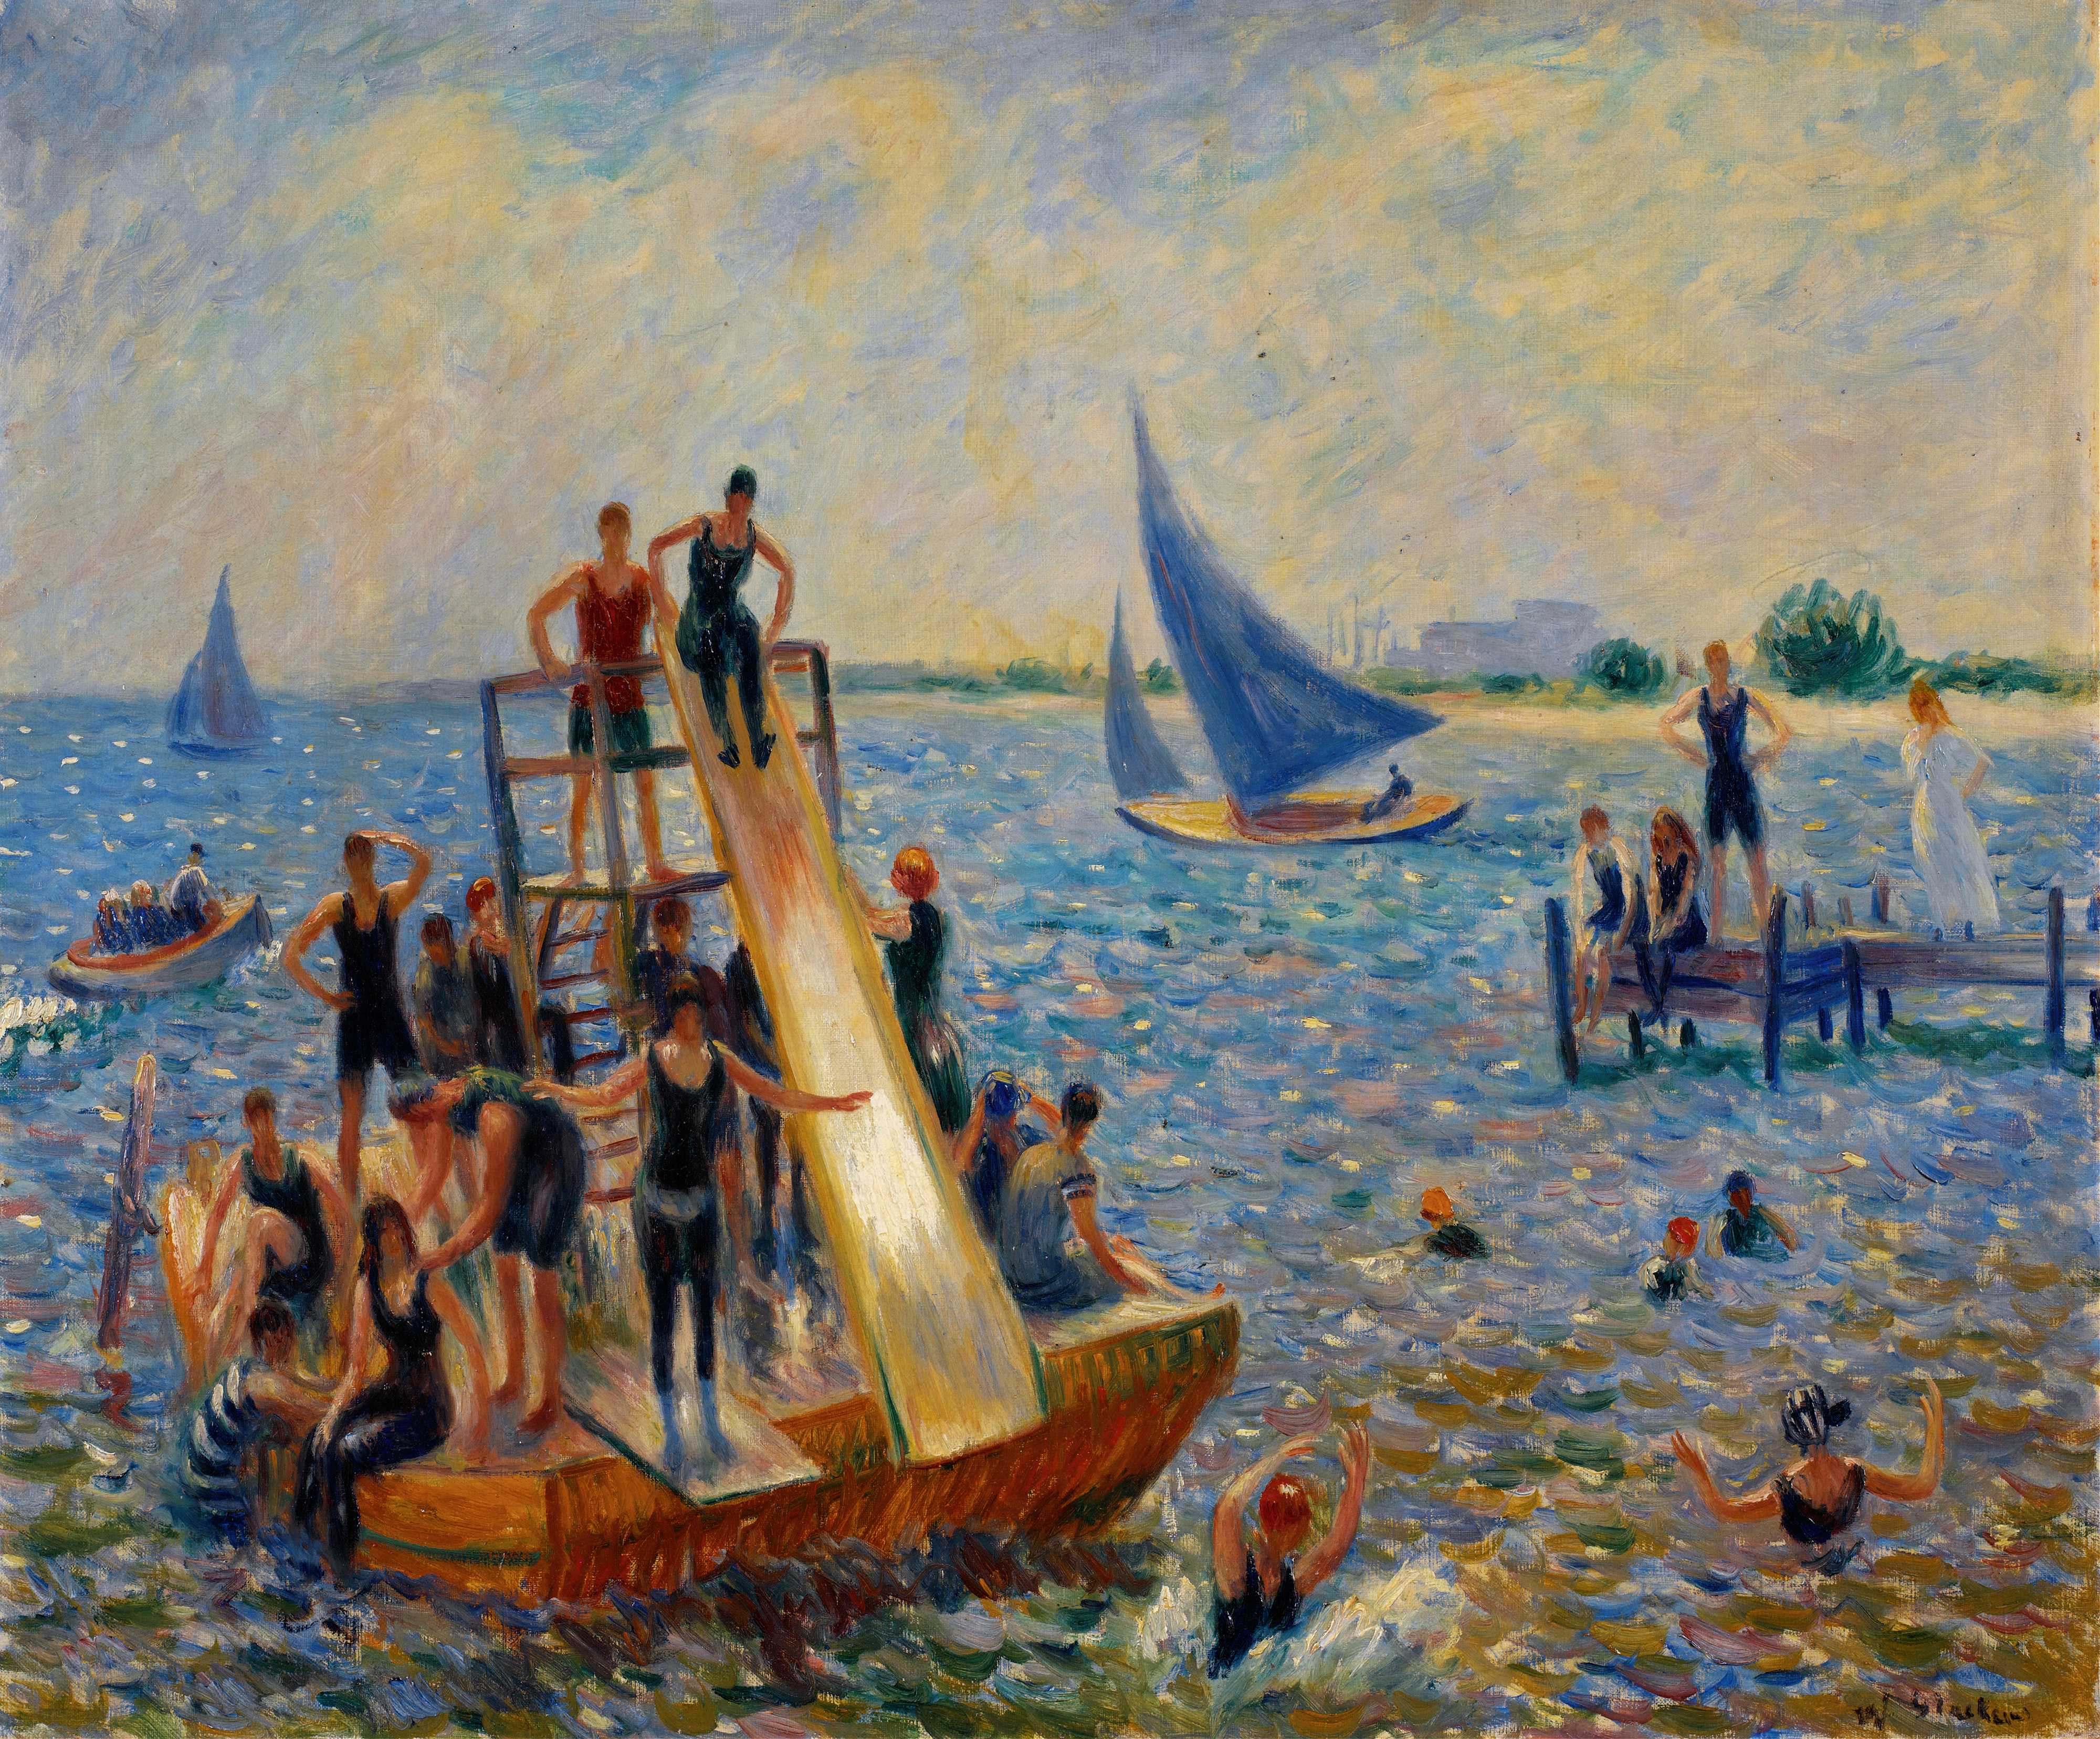 Find out more about William James Glackens - The Raft